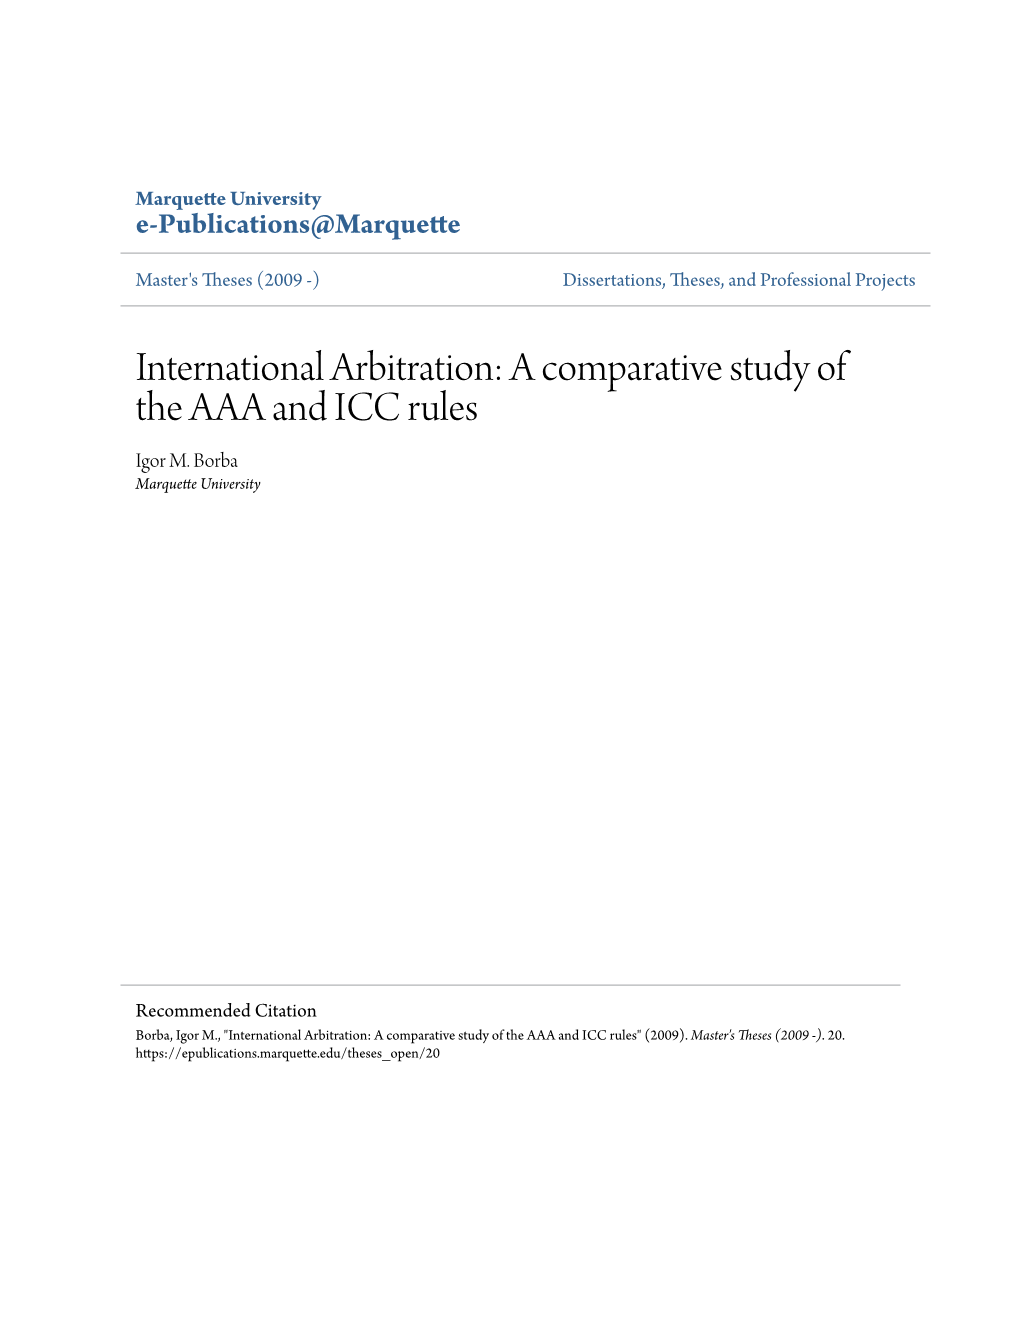 International Arbitration: a Comparative Study of the AAA and ICC Rules Igor M